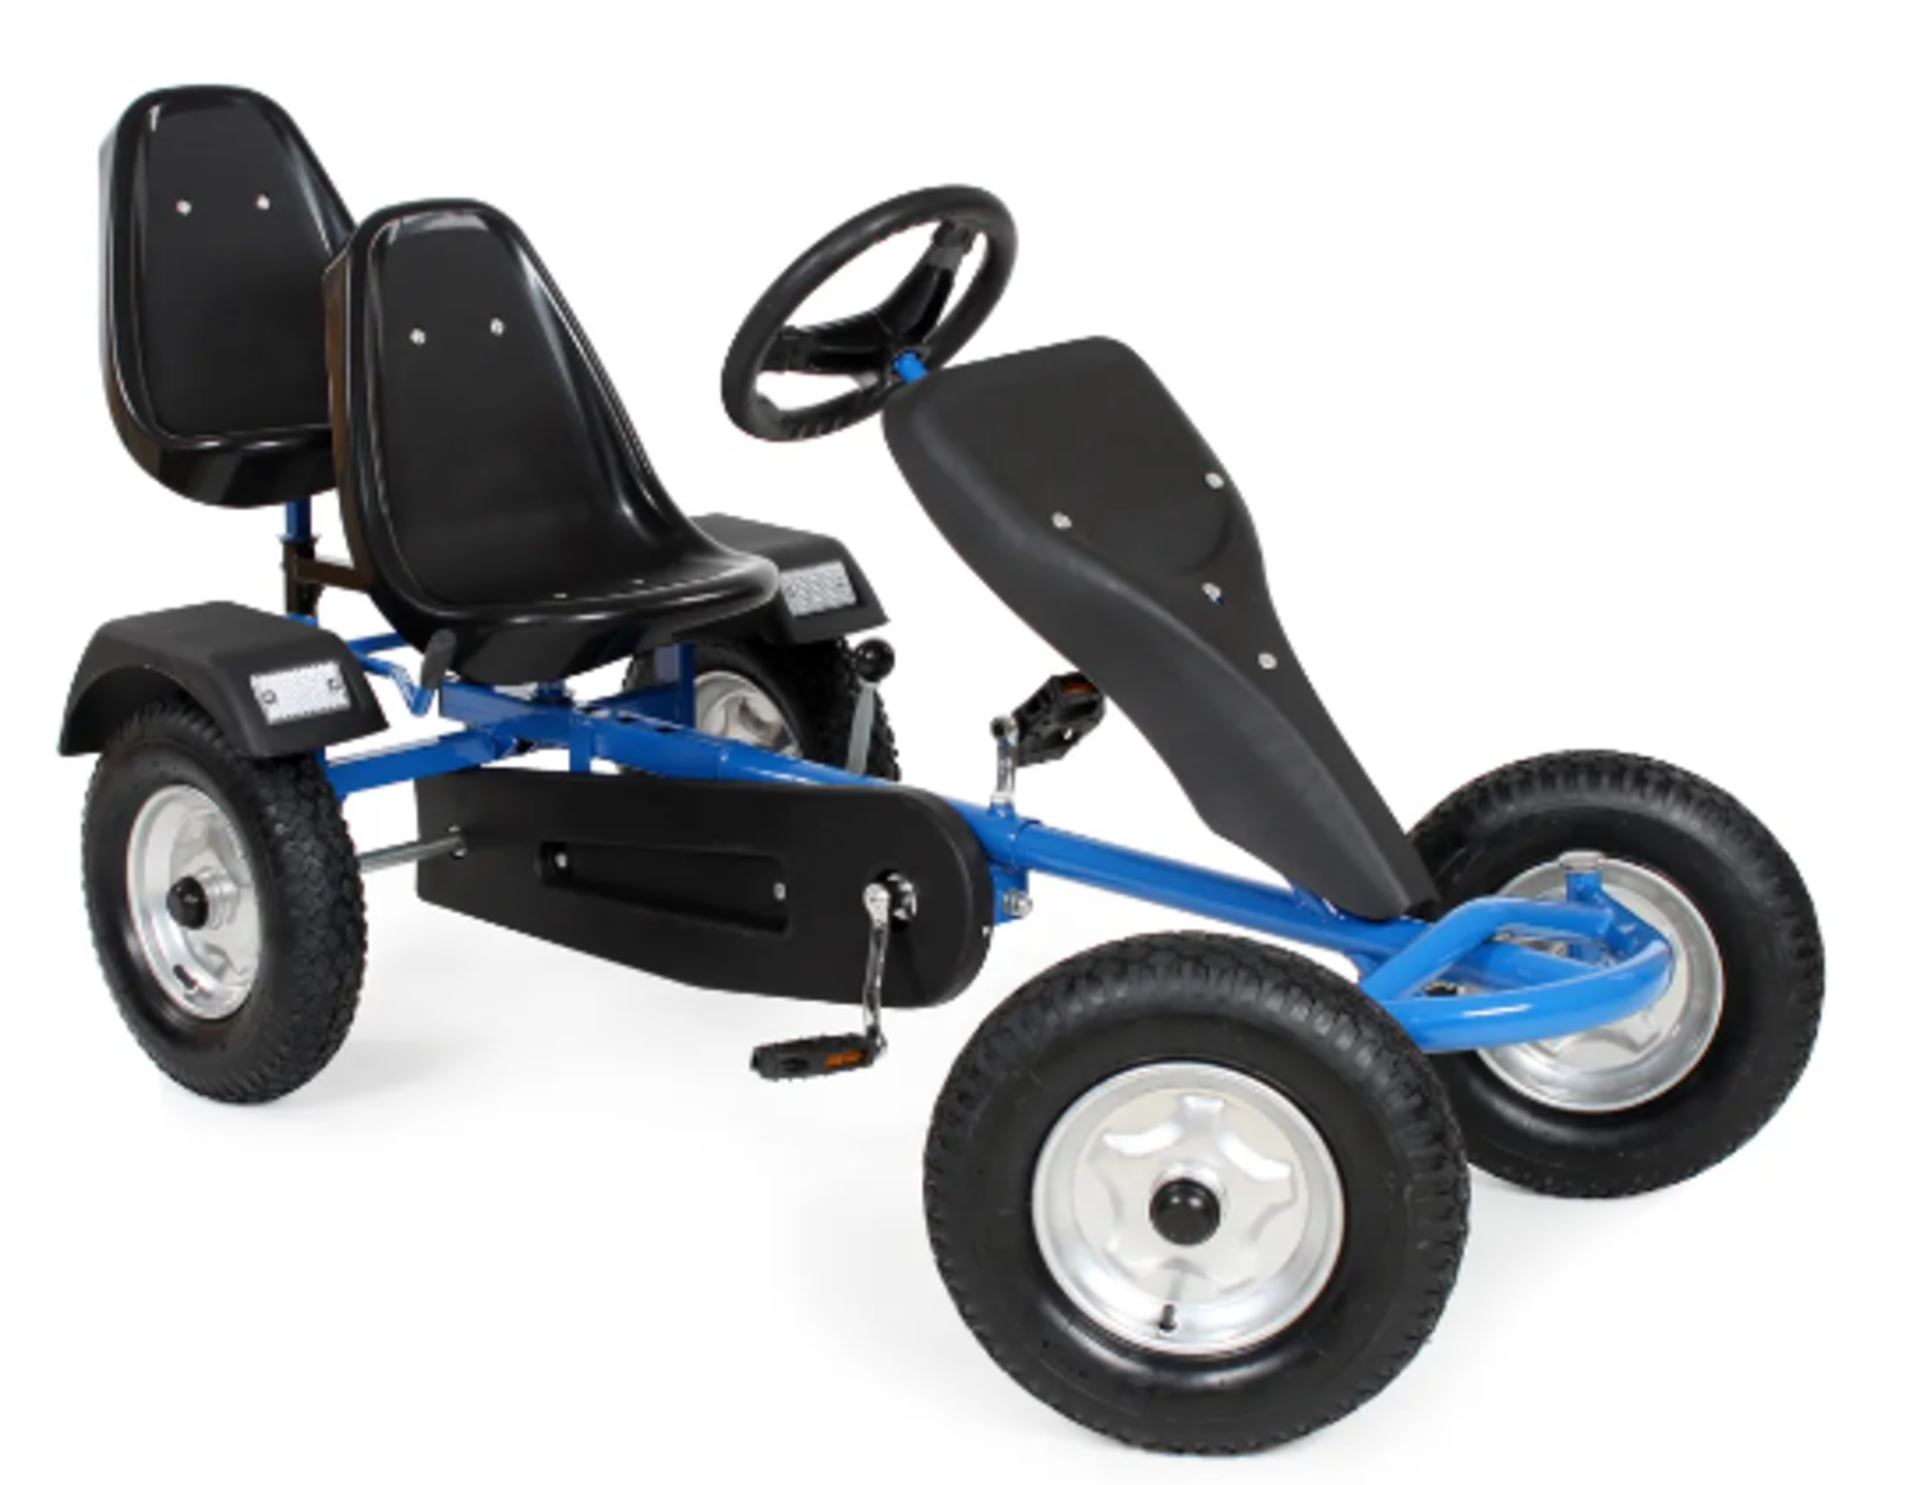 Tectake - Go kart with 2 seats blue - Boxed. RRP £299